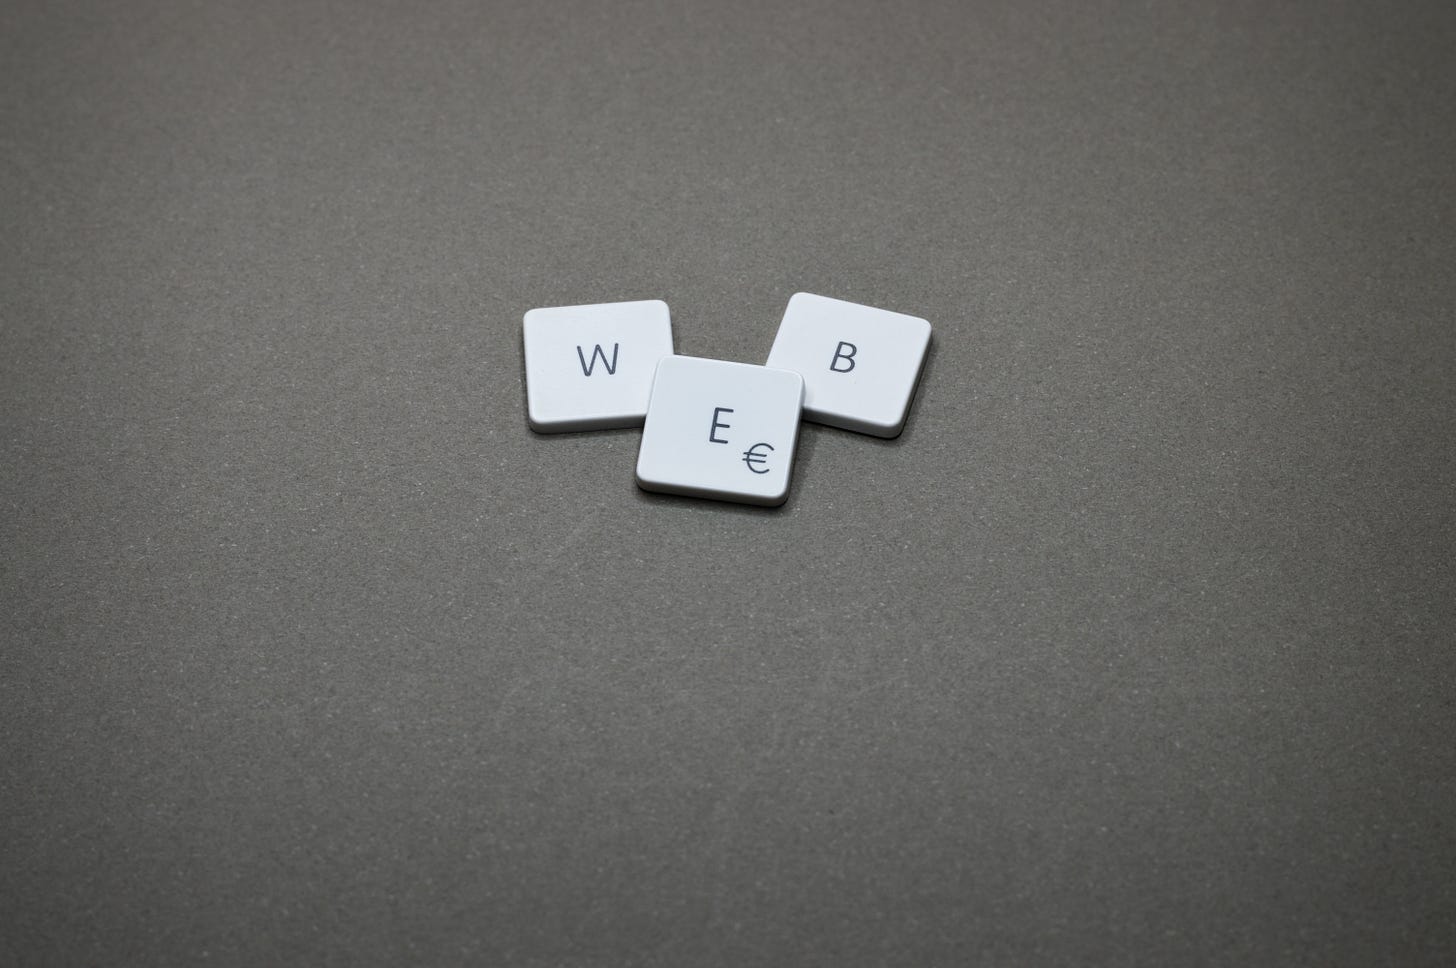 WEB spelled in scrabble pieces on a gray background